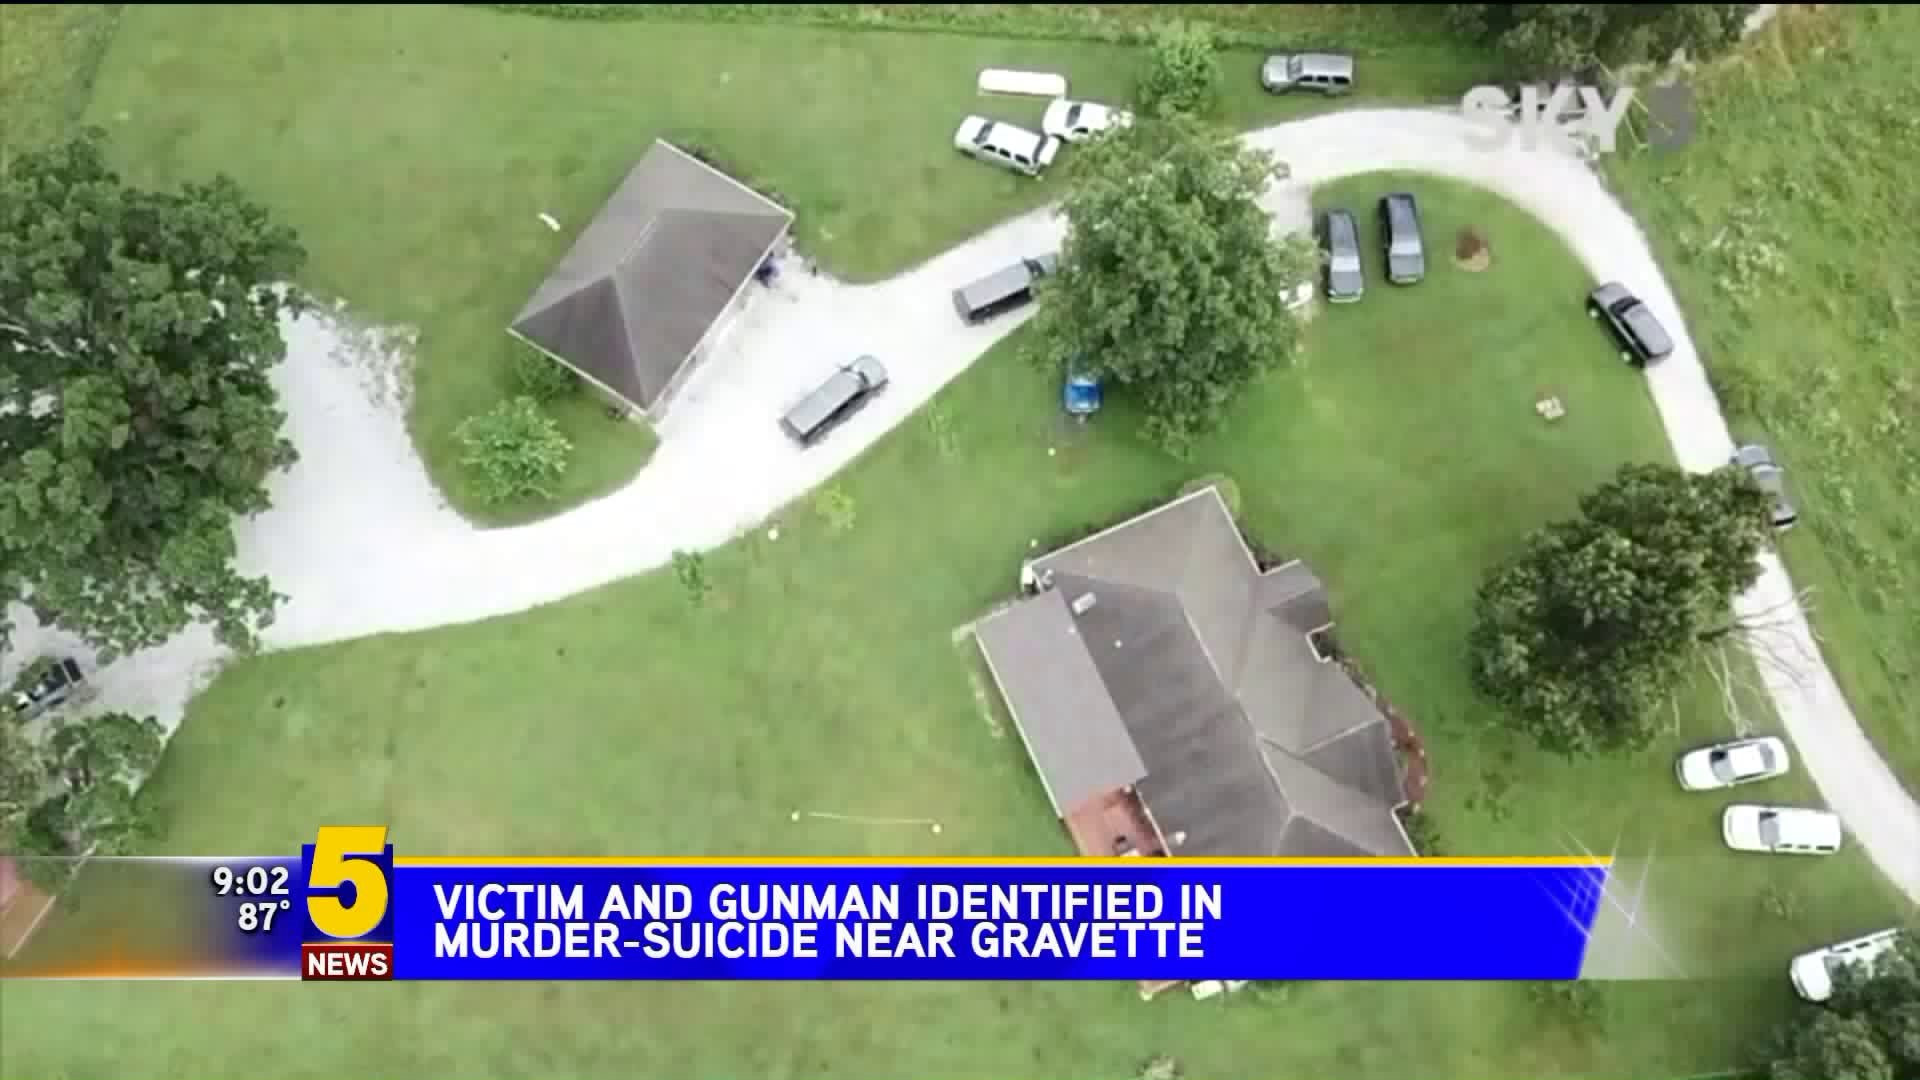 Victims And Gunman Identified In Murder-Suicide Near Gravette